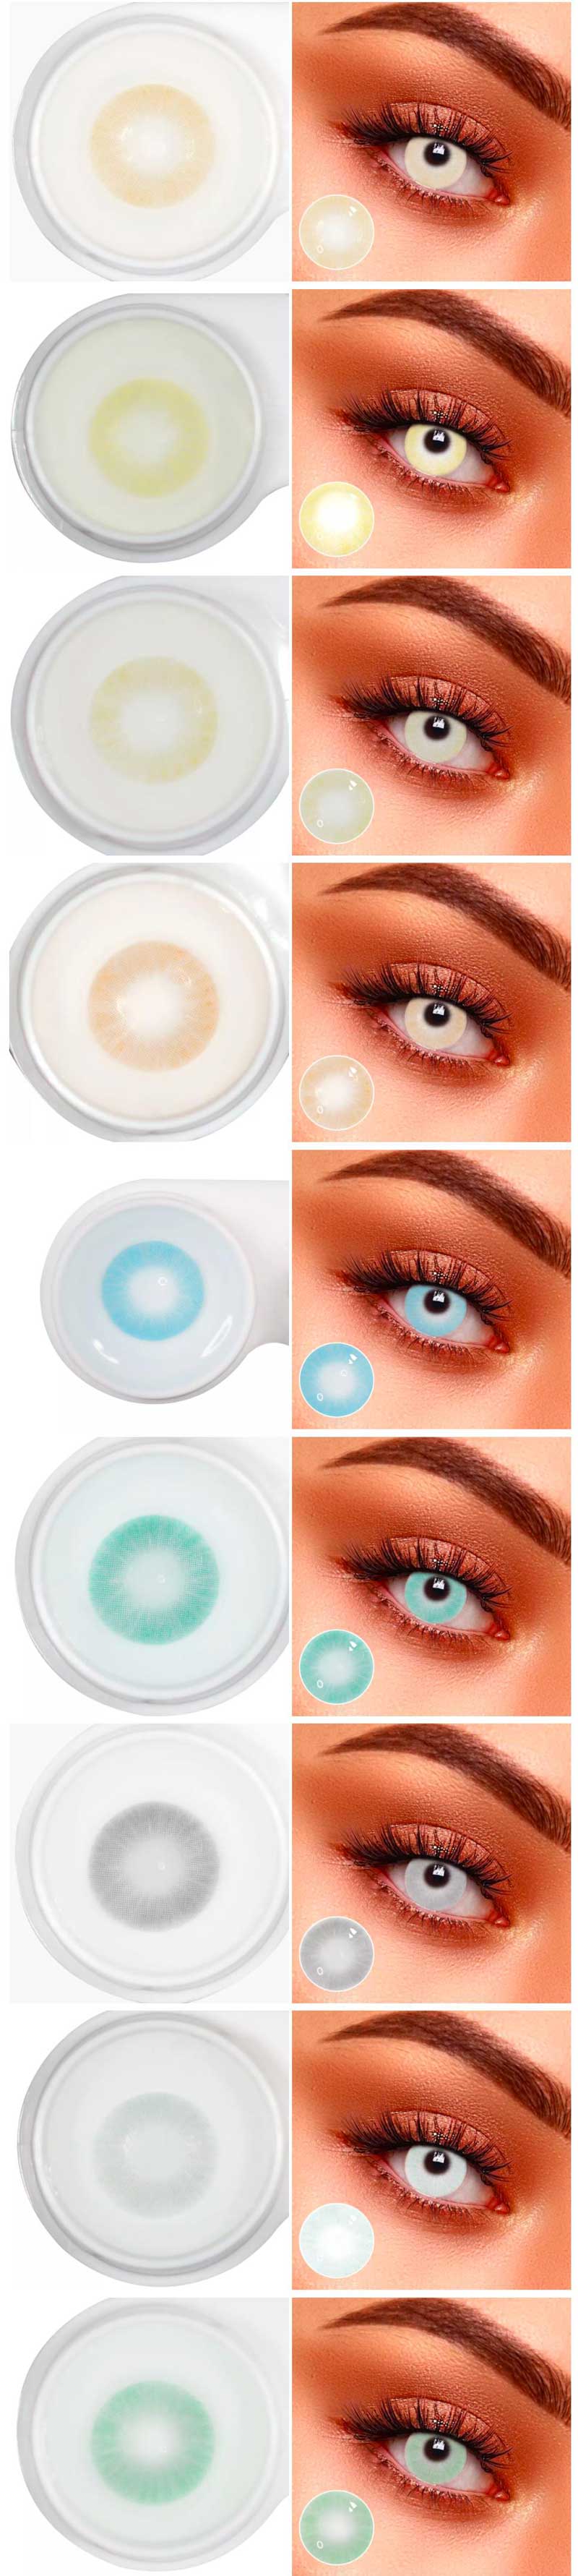 https://www.eyecontactlens.com/products/